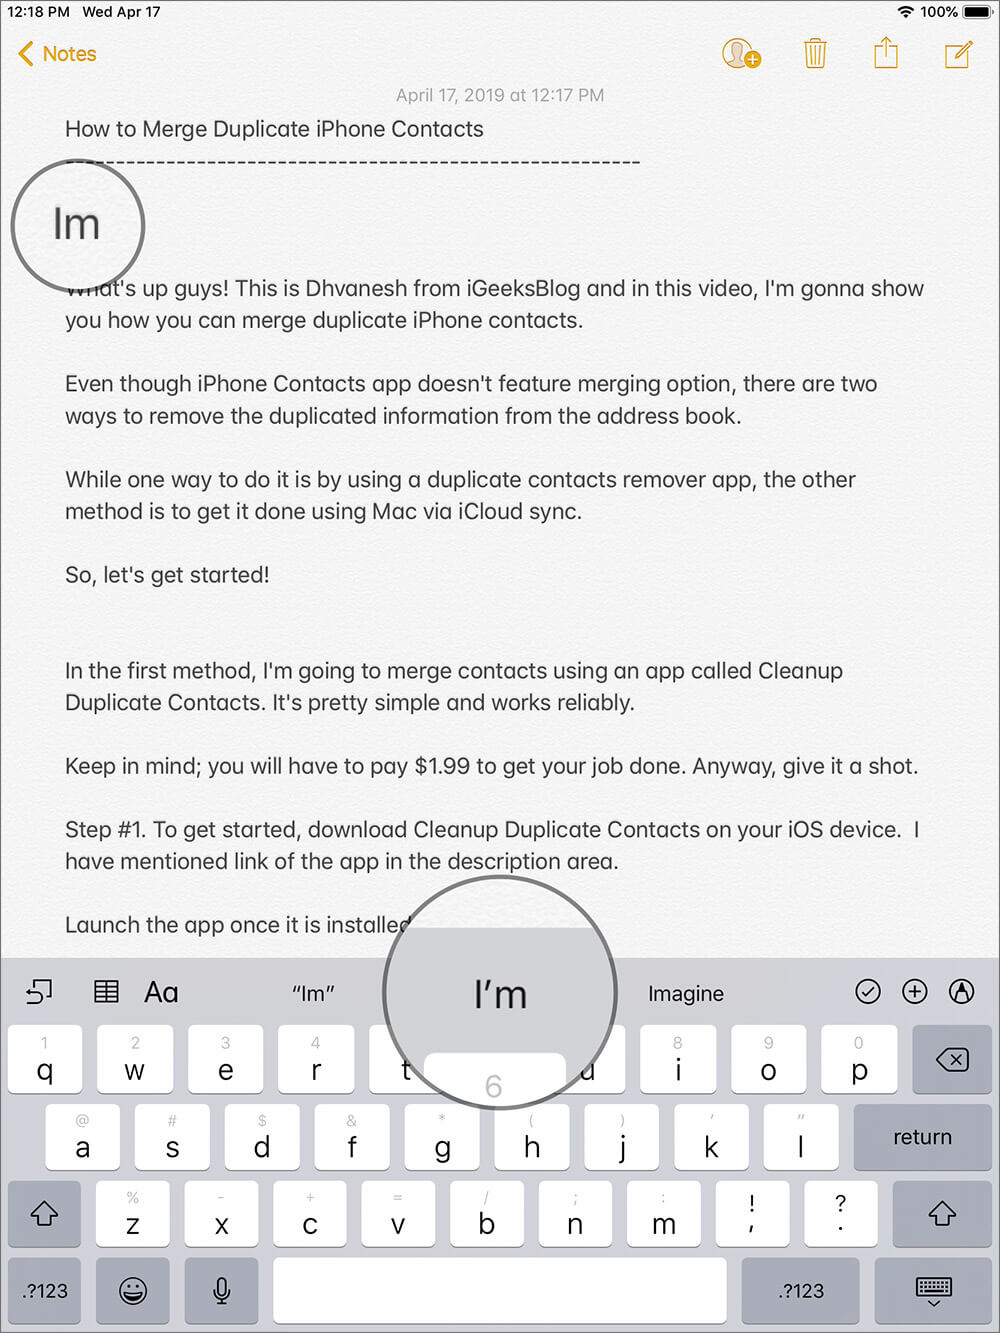 Use Automatic Apostrophes on iPad Keyboard